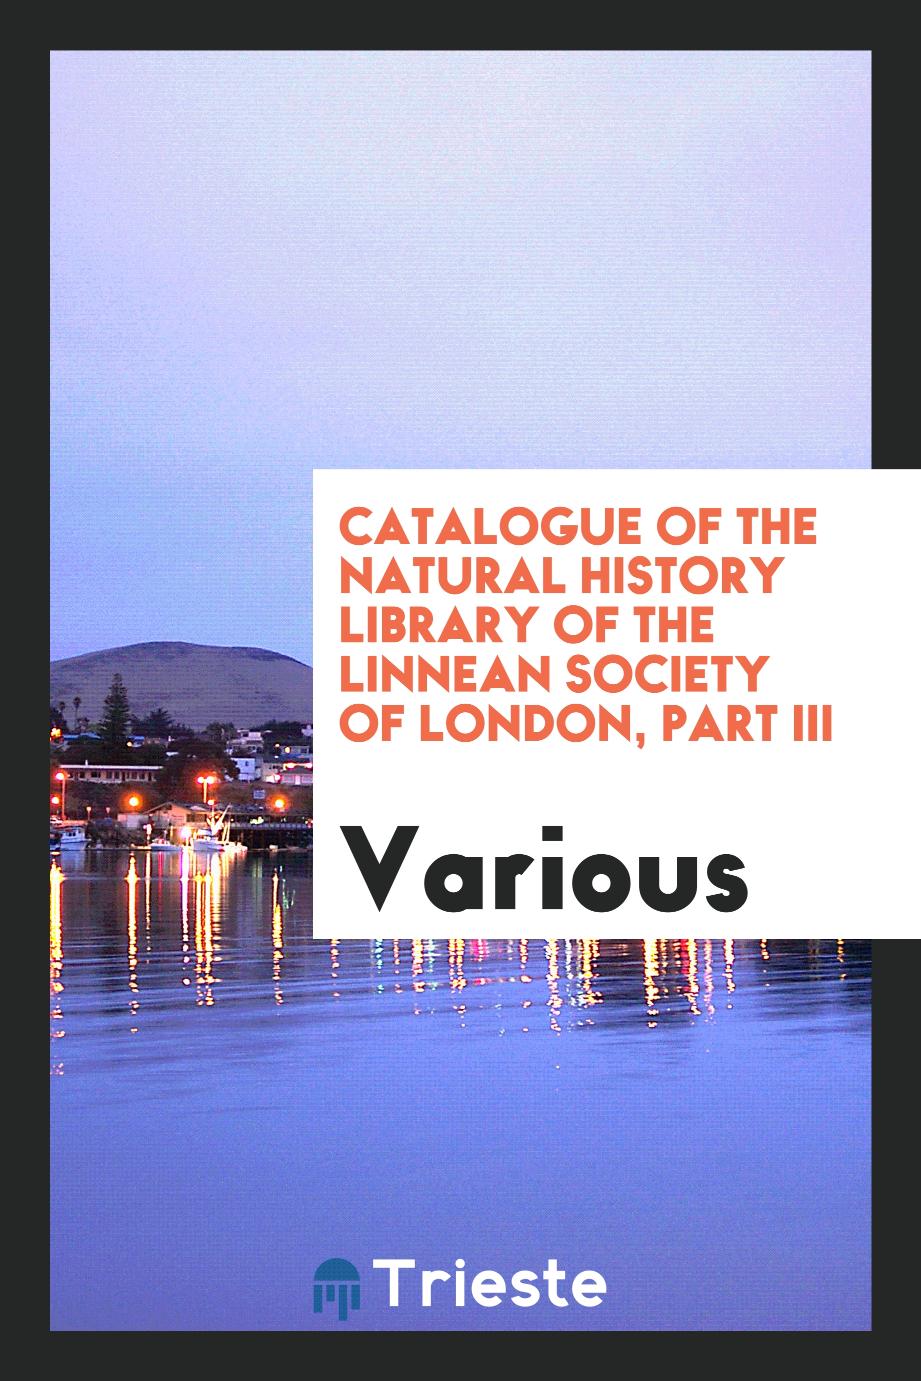 Catalogue of the Natural History Library of the Linnean Society of London, Part III